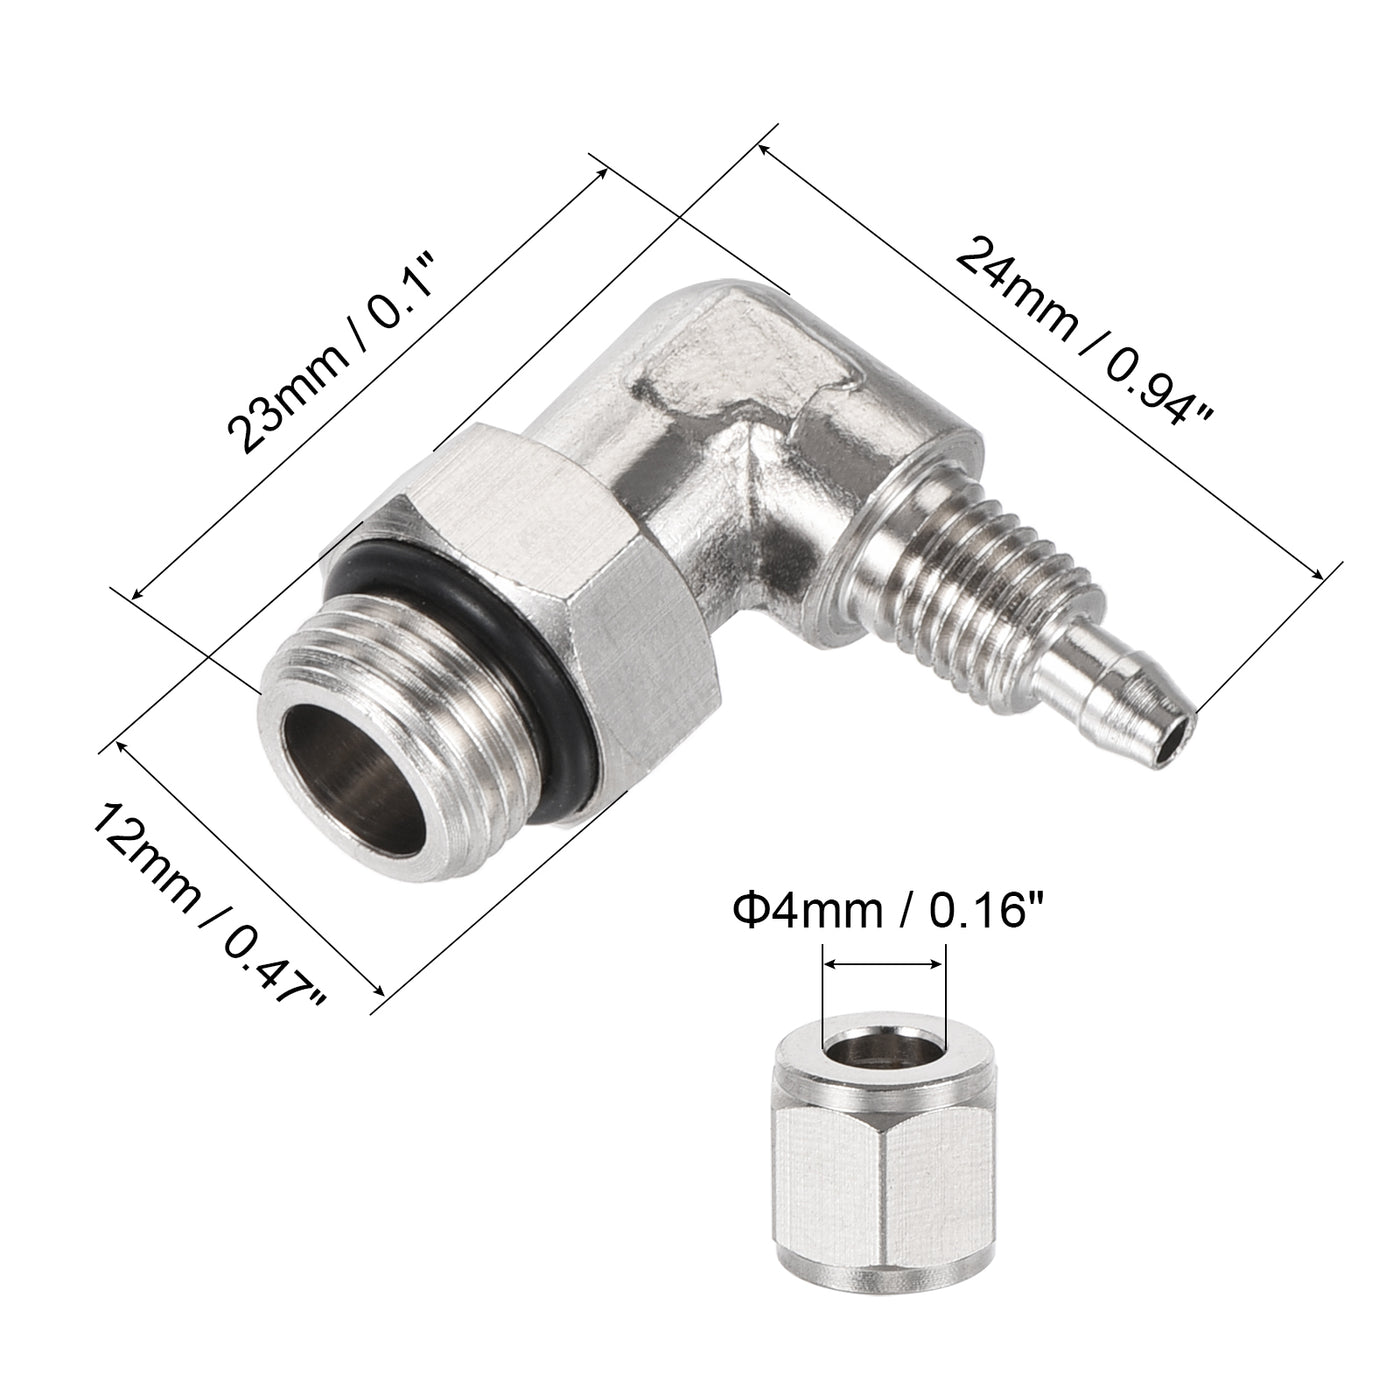 Harfington Elbow Tube Fitting Fit for Tube OD Nickel-plated Copper Adapter Fitting